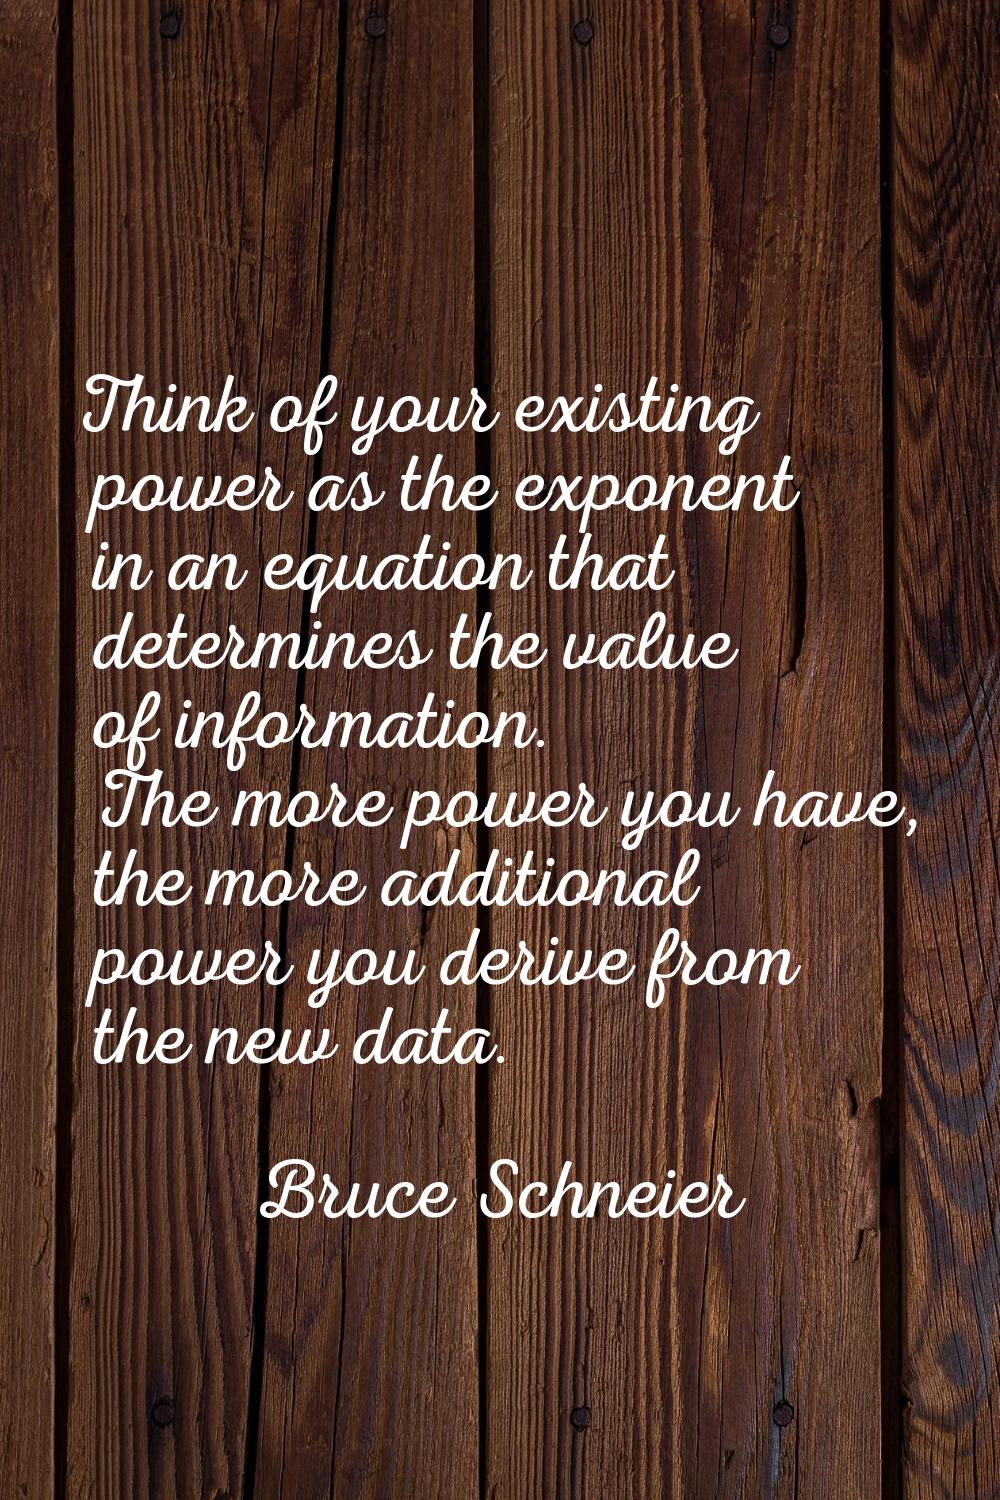 Think of your existing power as the exponent in an equation that determines the value of informatio